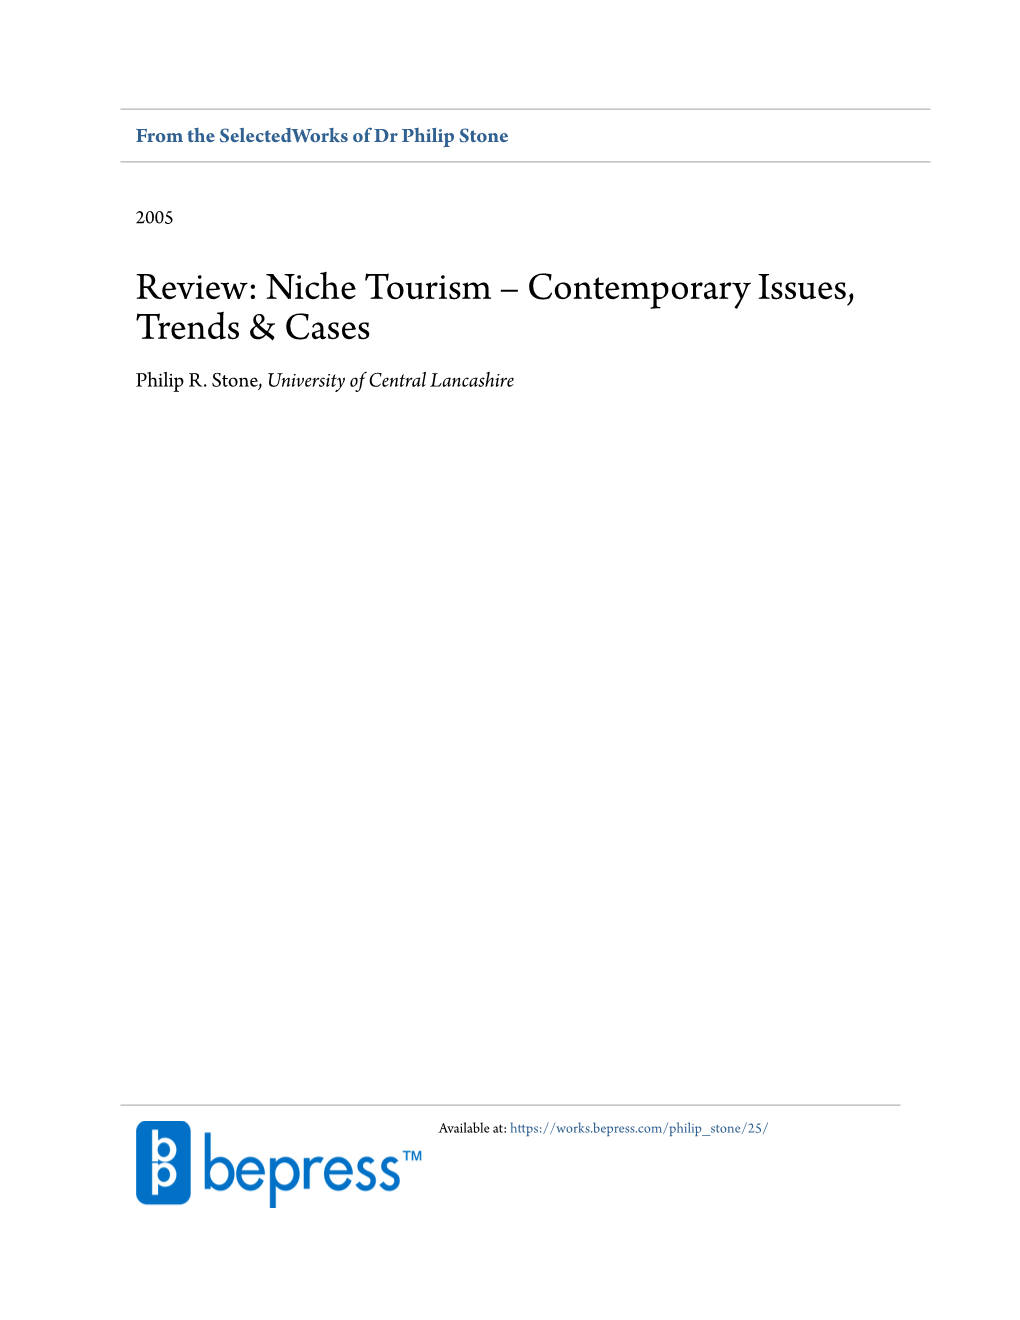 Review: Niche Tourism – Contemporary Issues, Trends & Cases